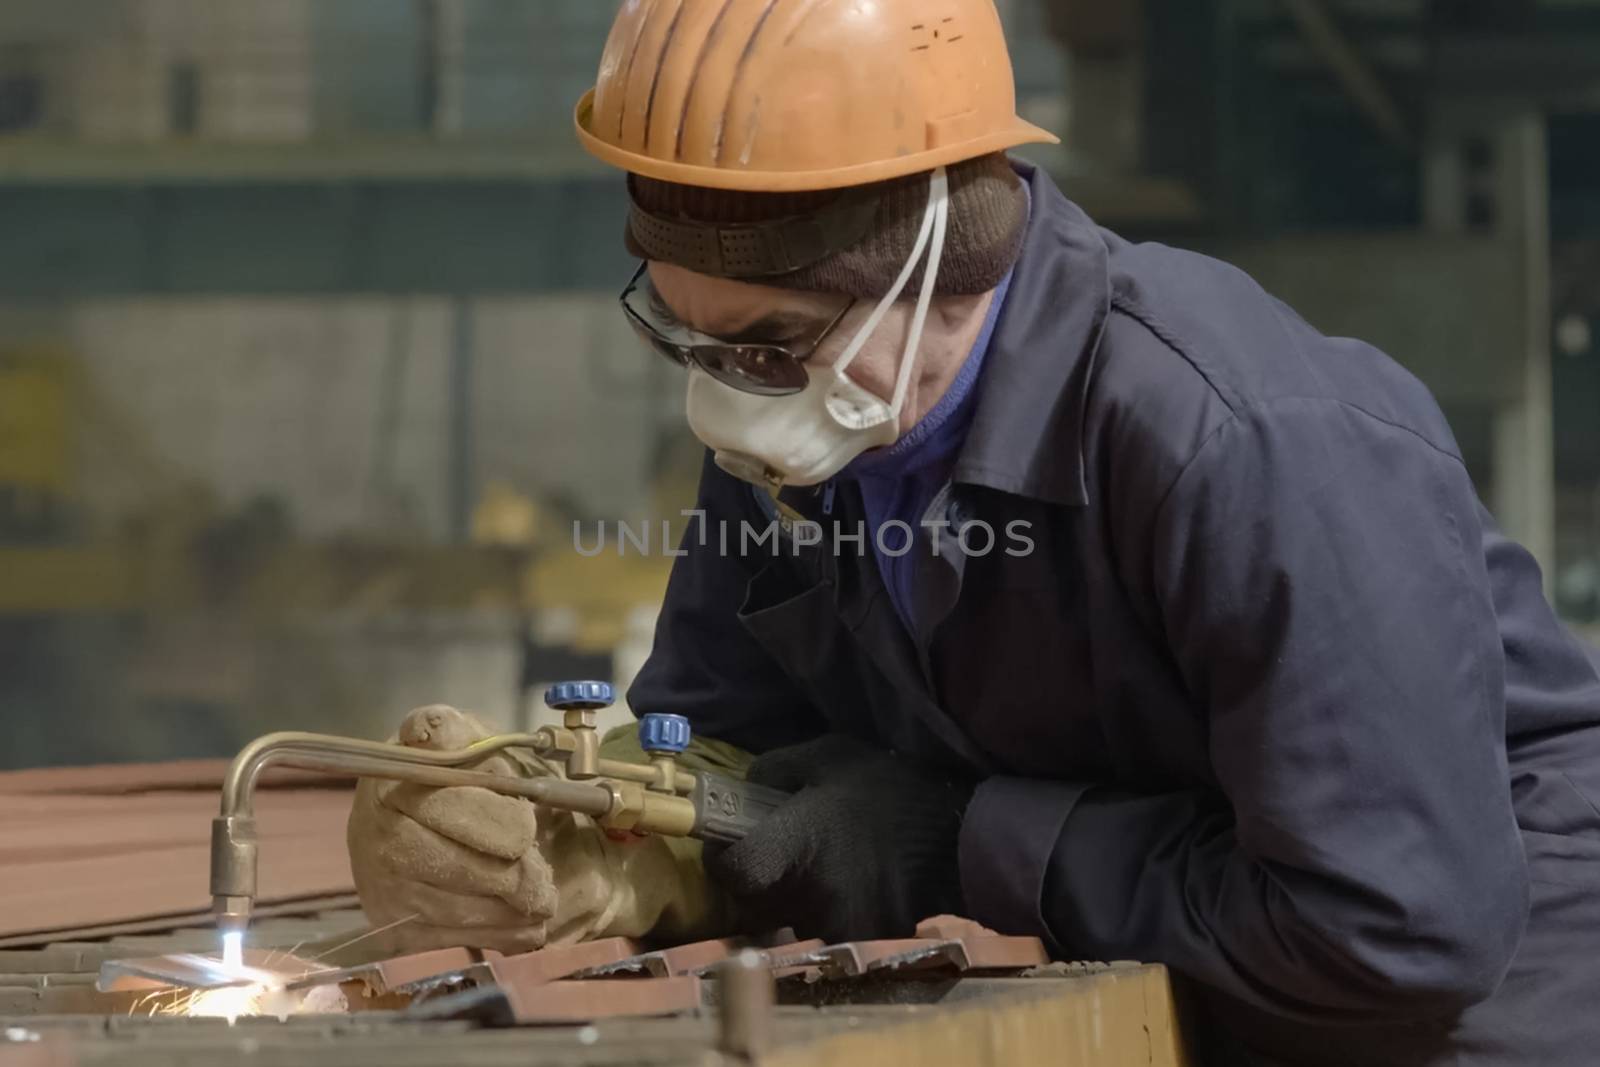 The welder cuts the metal with gas welding. by nyrok